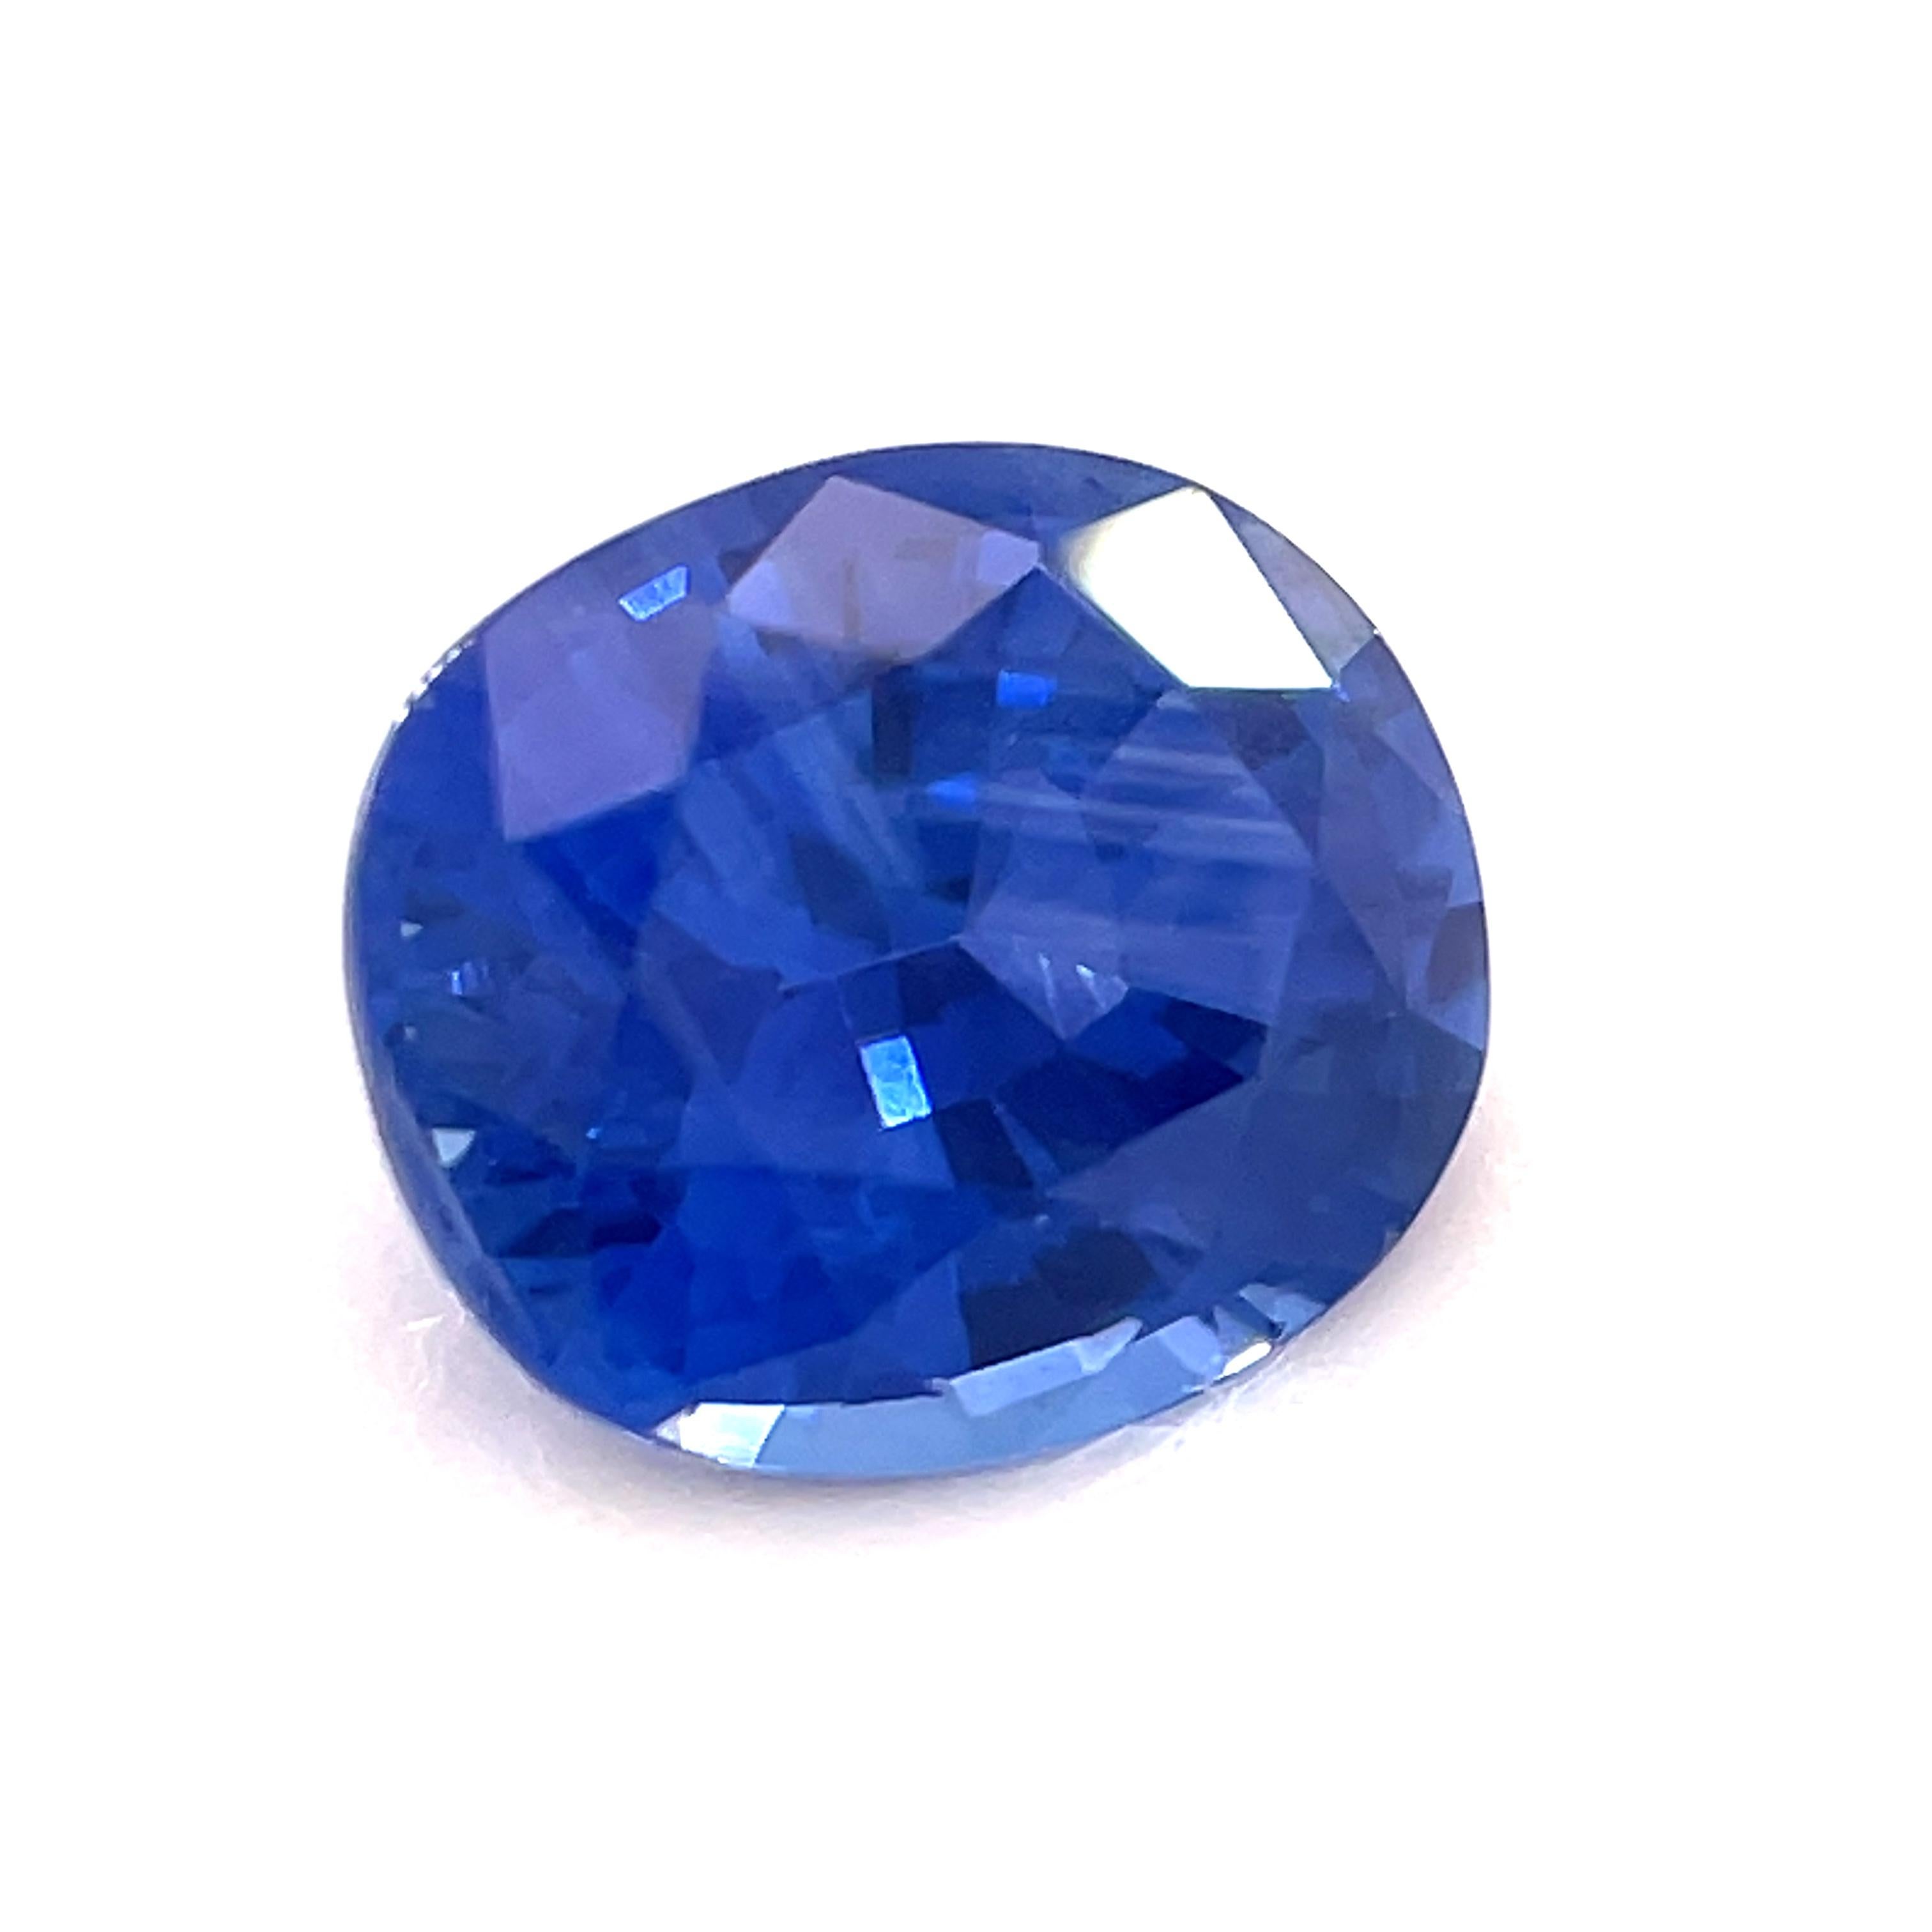 This petite blue sapphire is a lovely gem at an amazingly affordable price! Weighing 1.17 carats with classic Ceylon cornflower blue color, it would look beautiful set with side diamonds as a traditional 3-stone ring! It has a roundish oval shape